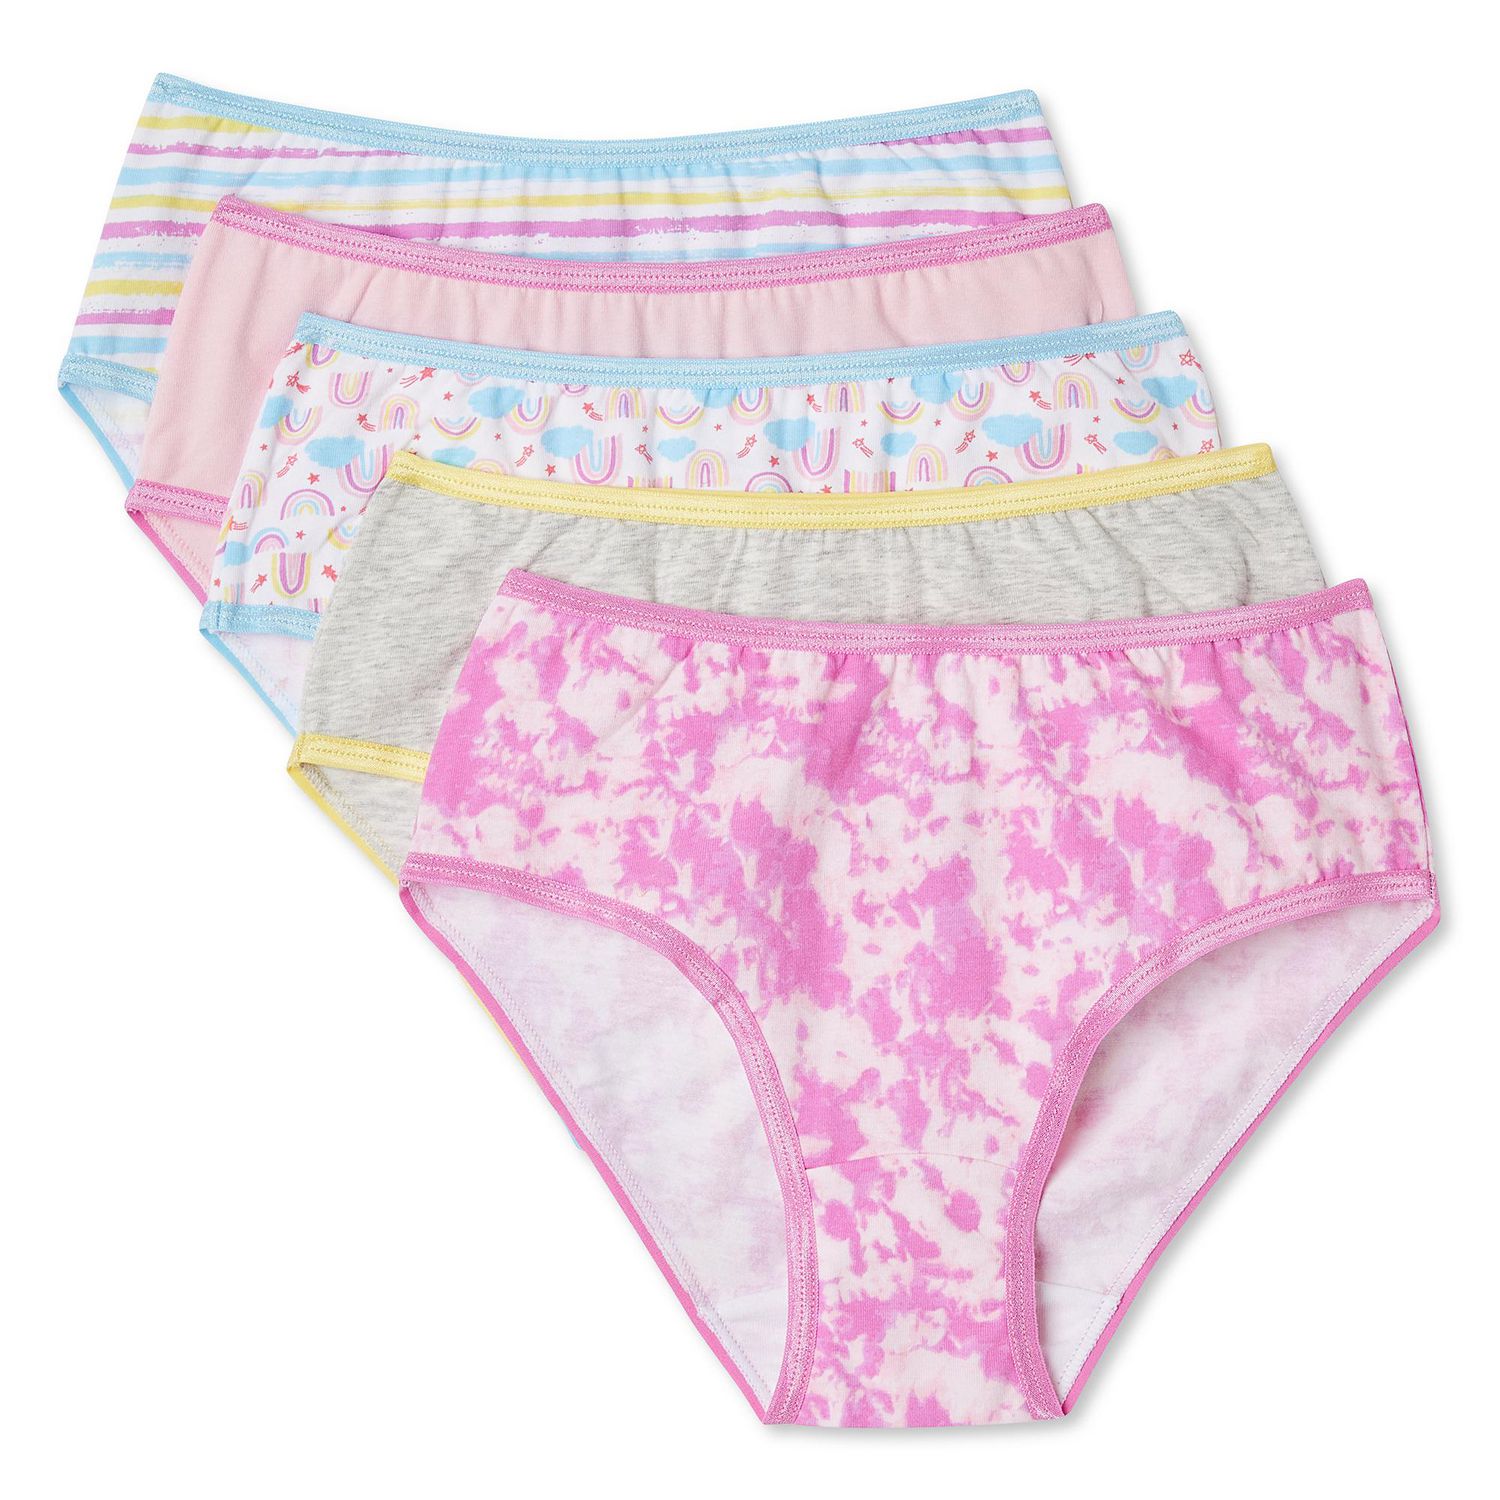 George Toddler Girls' Briefs 7-Pack, Sizes 2T-4T